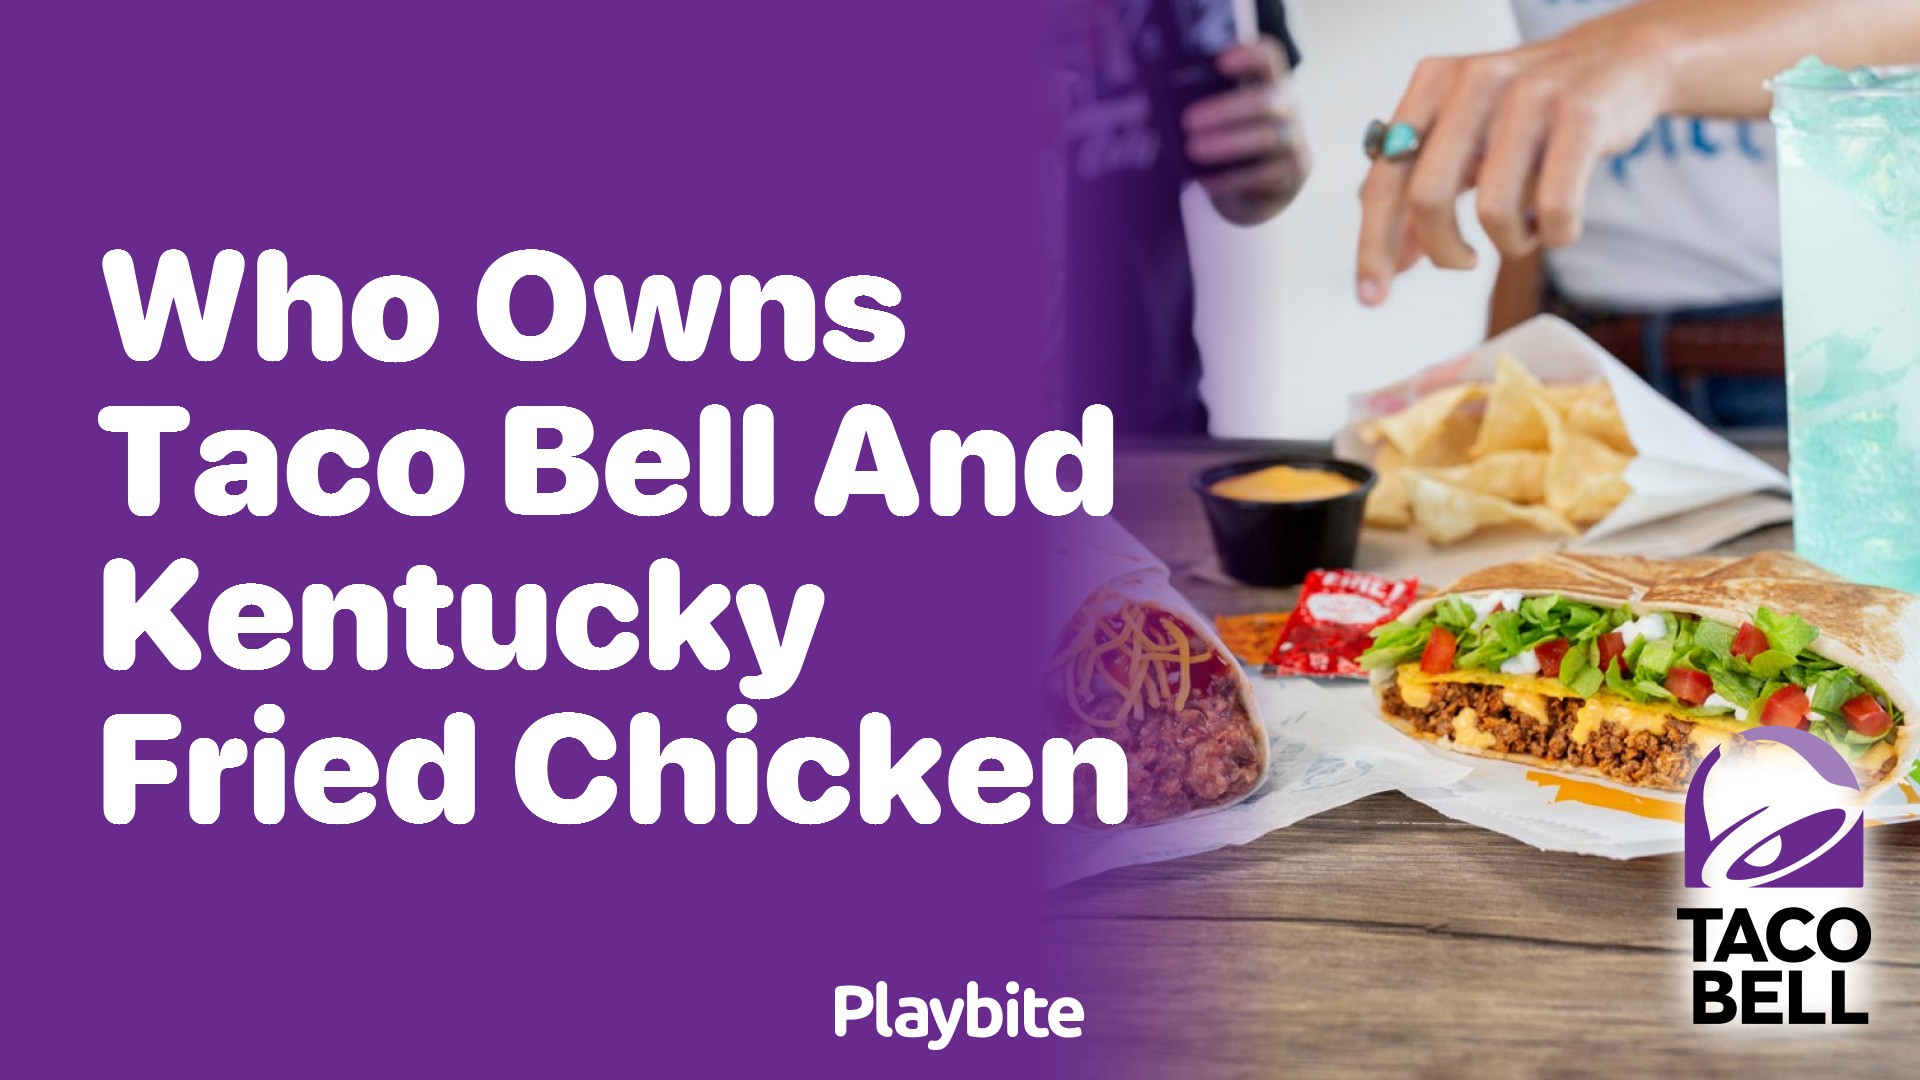 Who Owns Taco Bell and Kentucky Fried Chicken?